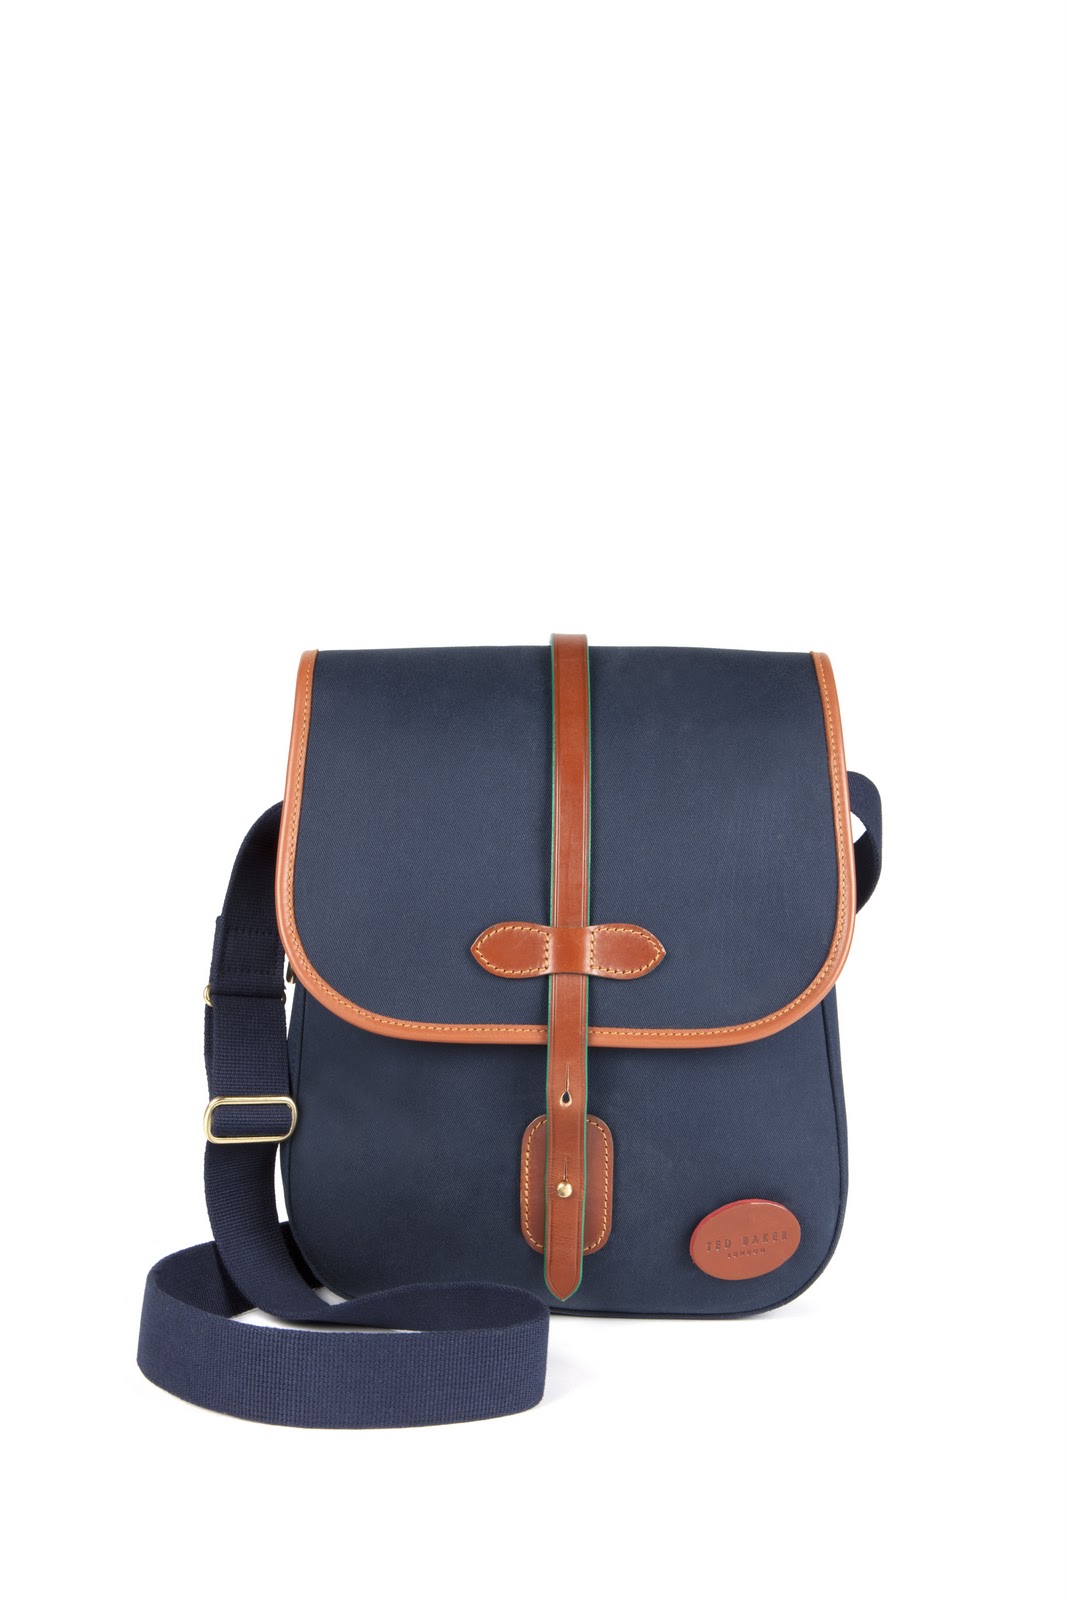 Ted Baker and Brady Bags like fishing - Maketh-The-Man | Mens lifestyle ...